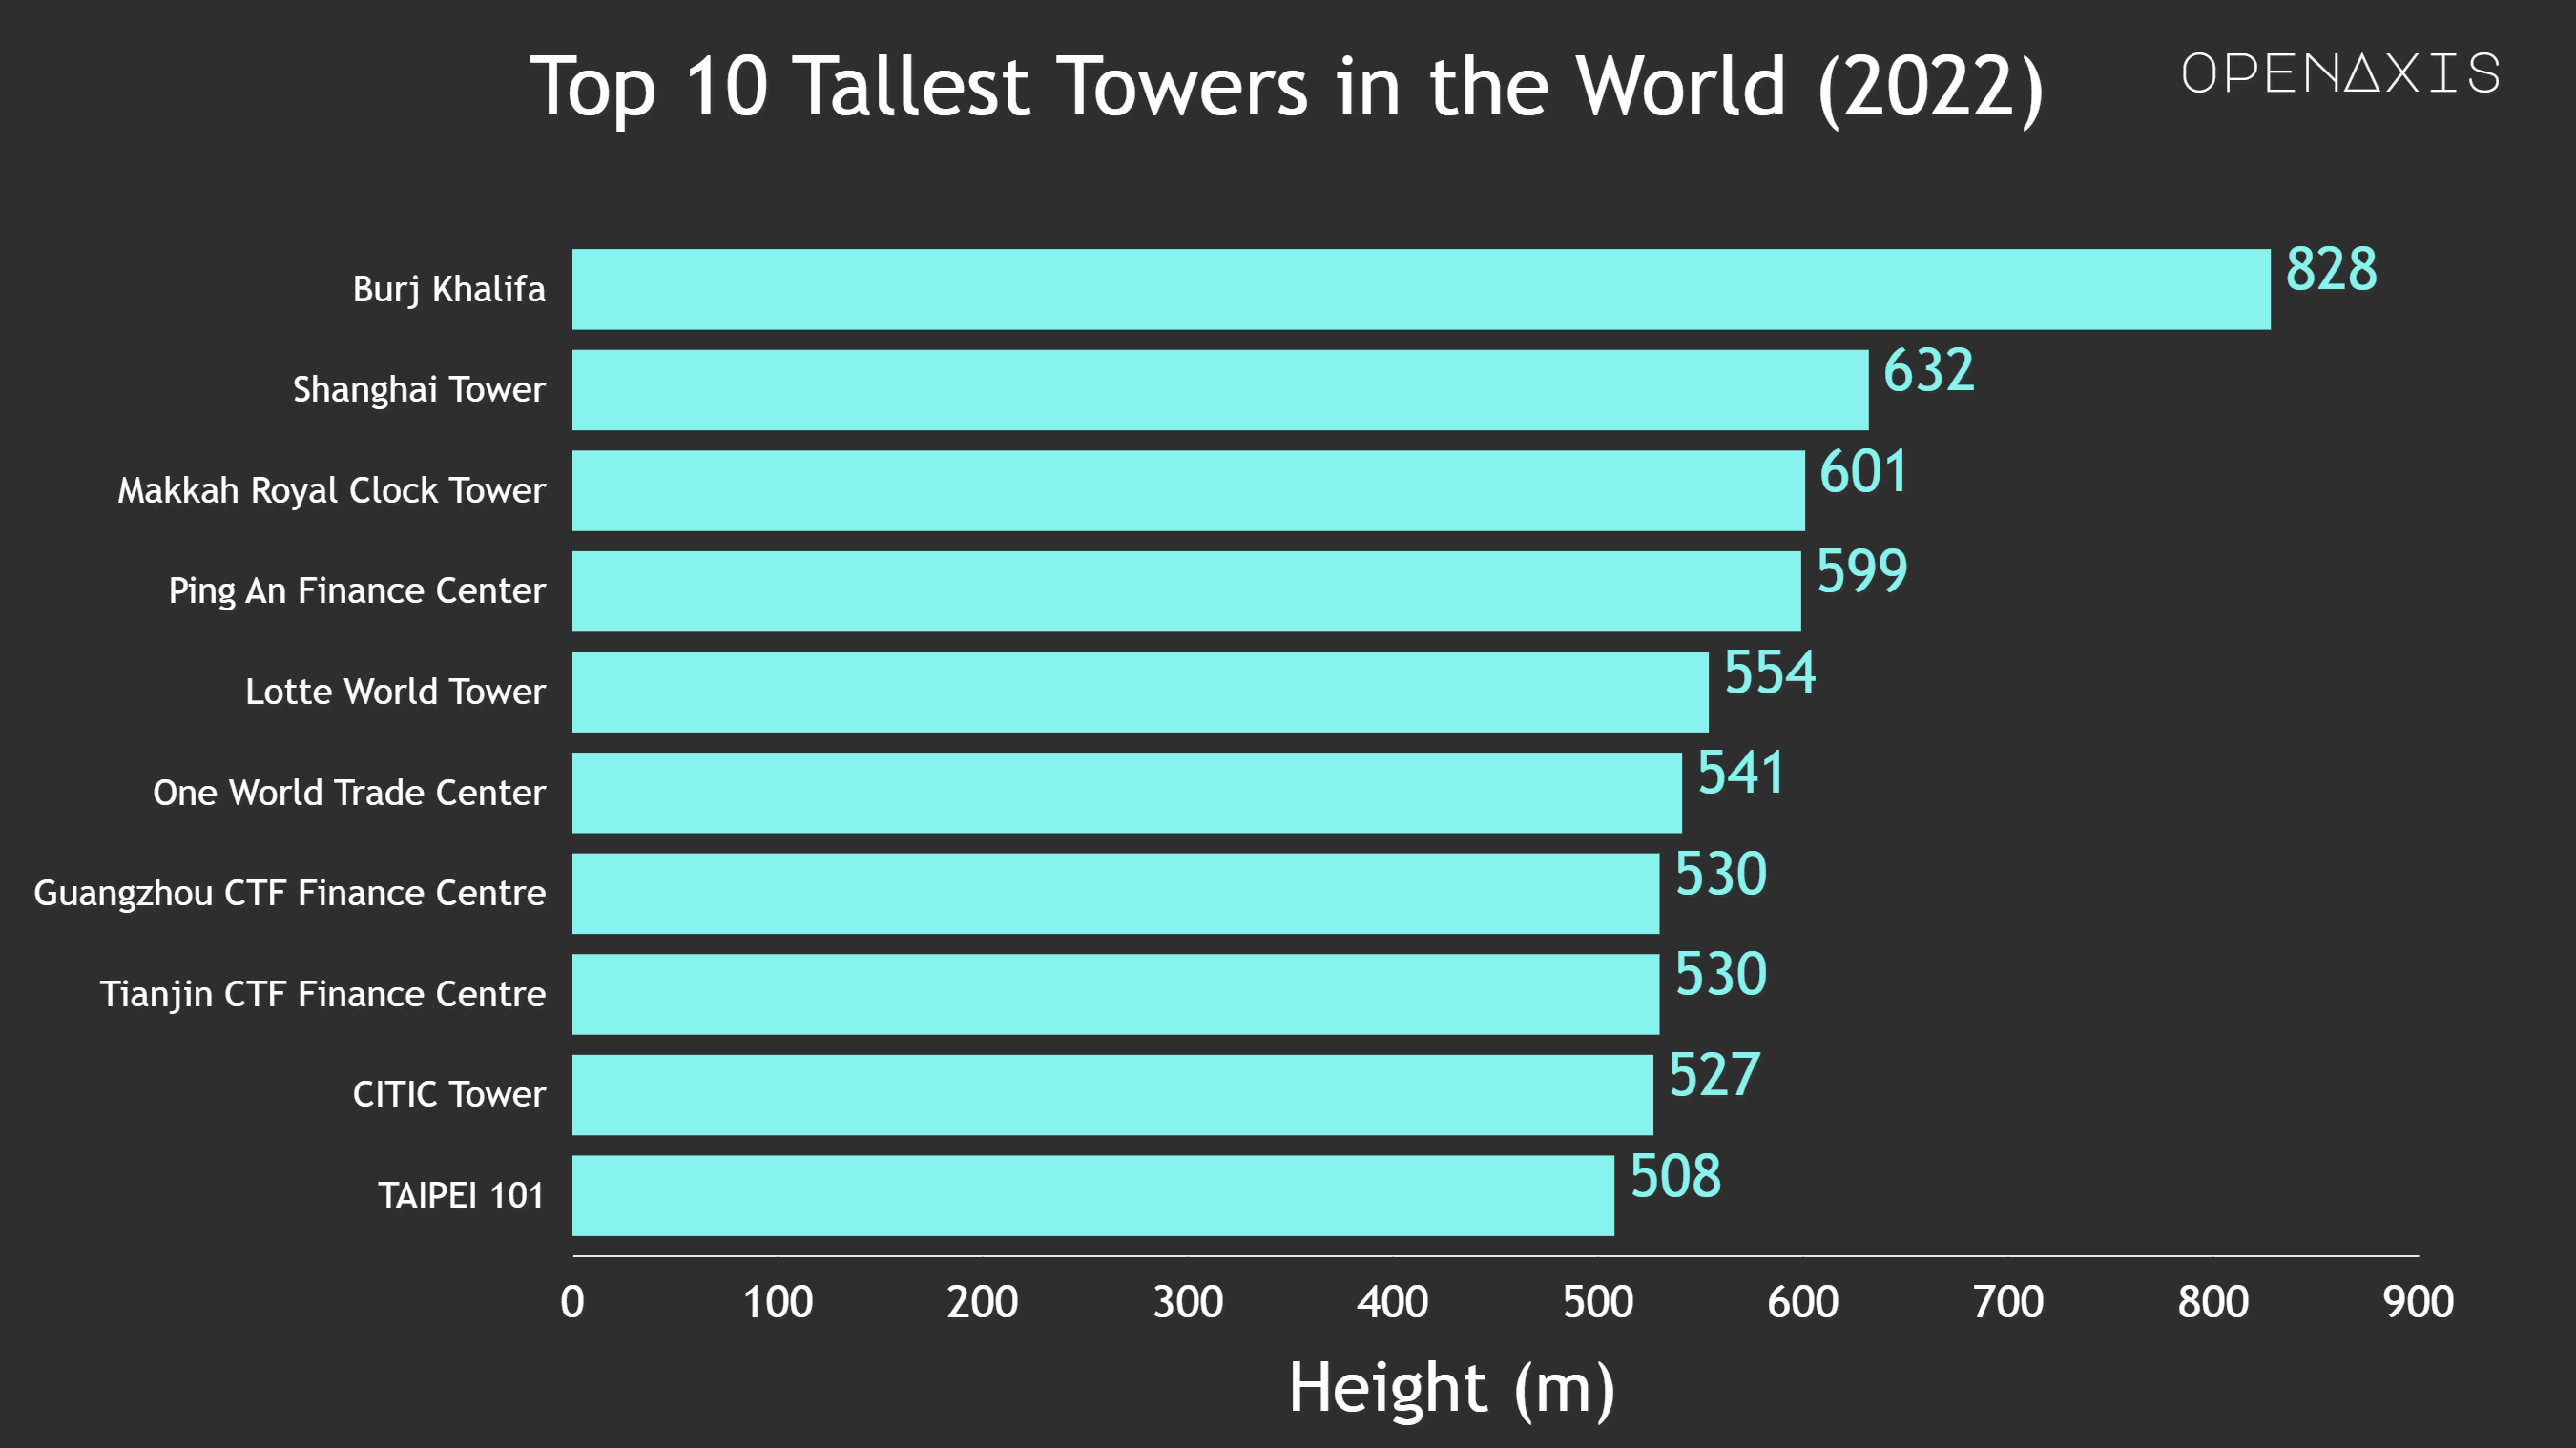 <p>Standing at 828 meters or 2,716.5 feet, and completed in 2010, Dubai's Burj Khalifa remains the tallest building in the world. Check out the full dataset listing the current top 100 towers in the world and their details.</p><p><br /></p><p>﻿<a href="/search?q=%23towers" target="_blank">#towers</a>﻿ ﻿<a href="/search?q=%23realestate" target="_blank">#realestate</a>﻿ ﻿<a href="/search?q=%23construction" target="_blank">#construction</a>﻿</p><p><br /></p><p>Source: <a href="/data/3794" target="_blank">Council on Tall Buildings and Urban Habitat (CTBUH)</a></p><p><br /></p>